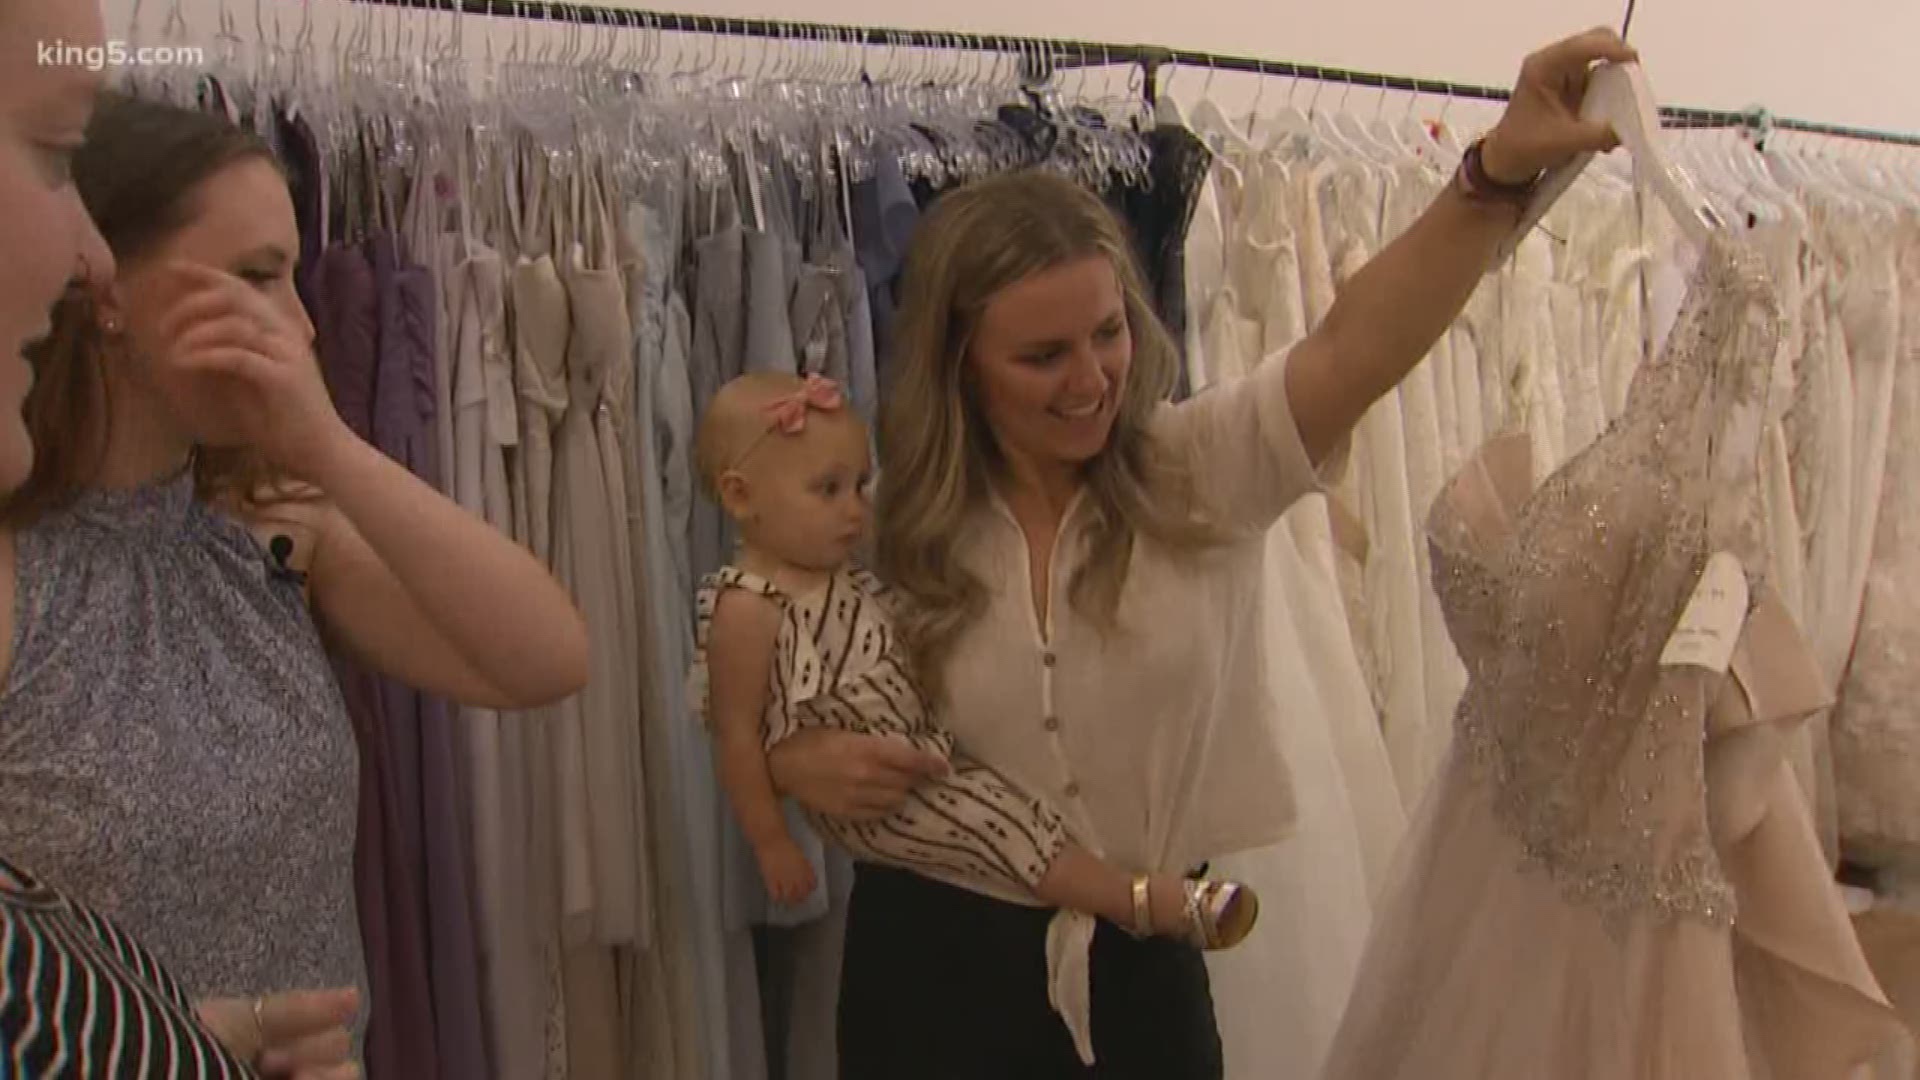 One boutique is making it easier for those in the military or first responders to budget for their wedding dress.